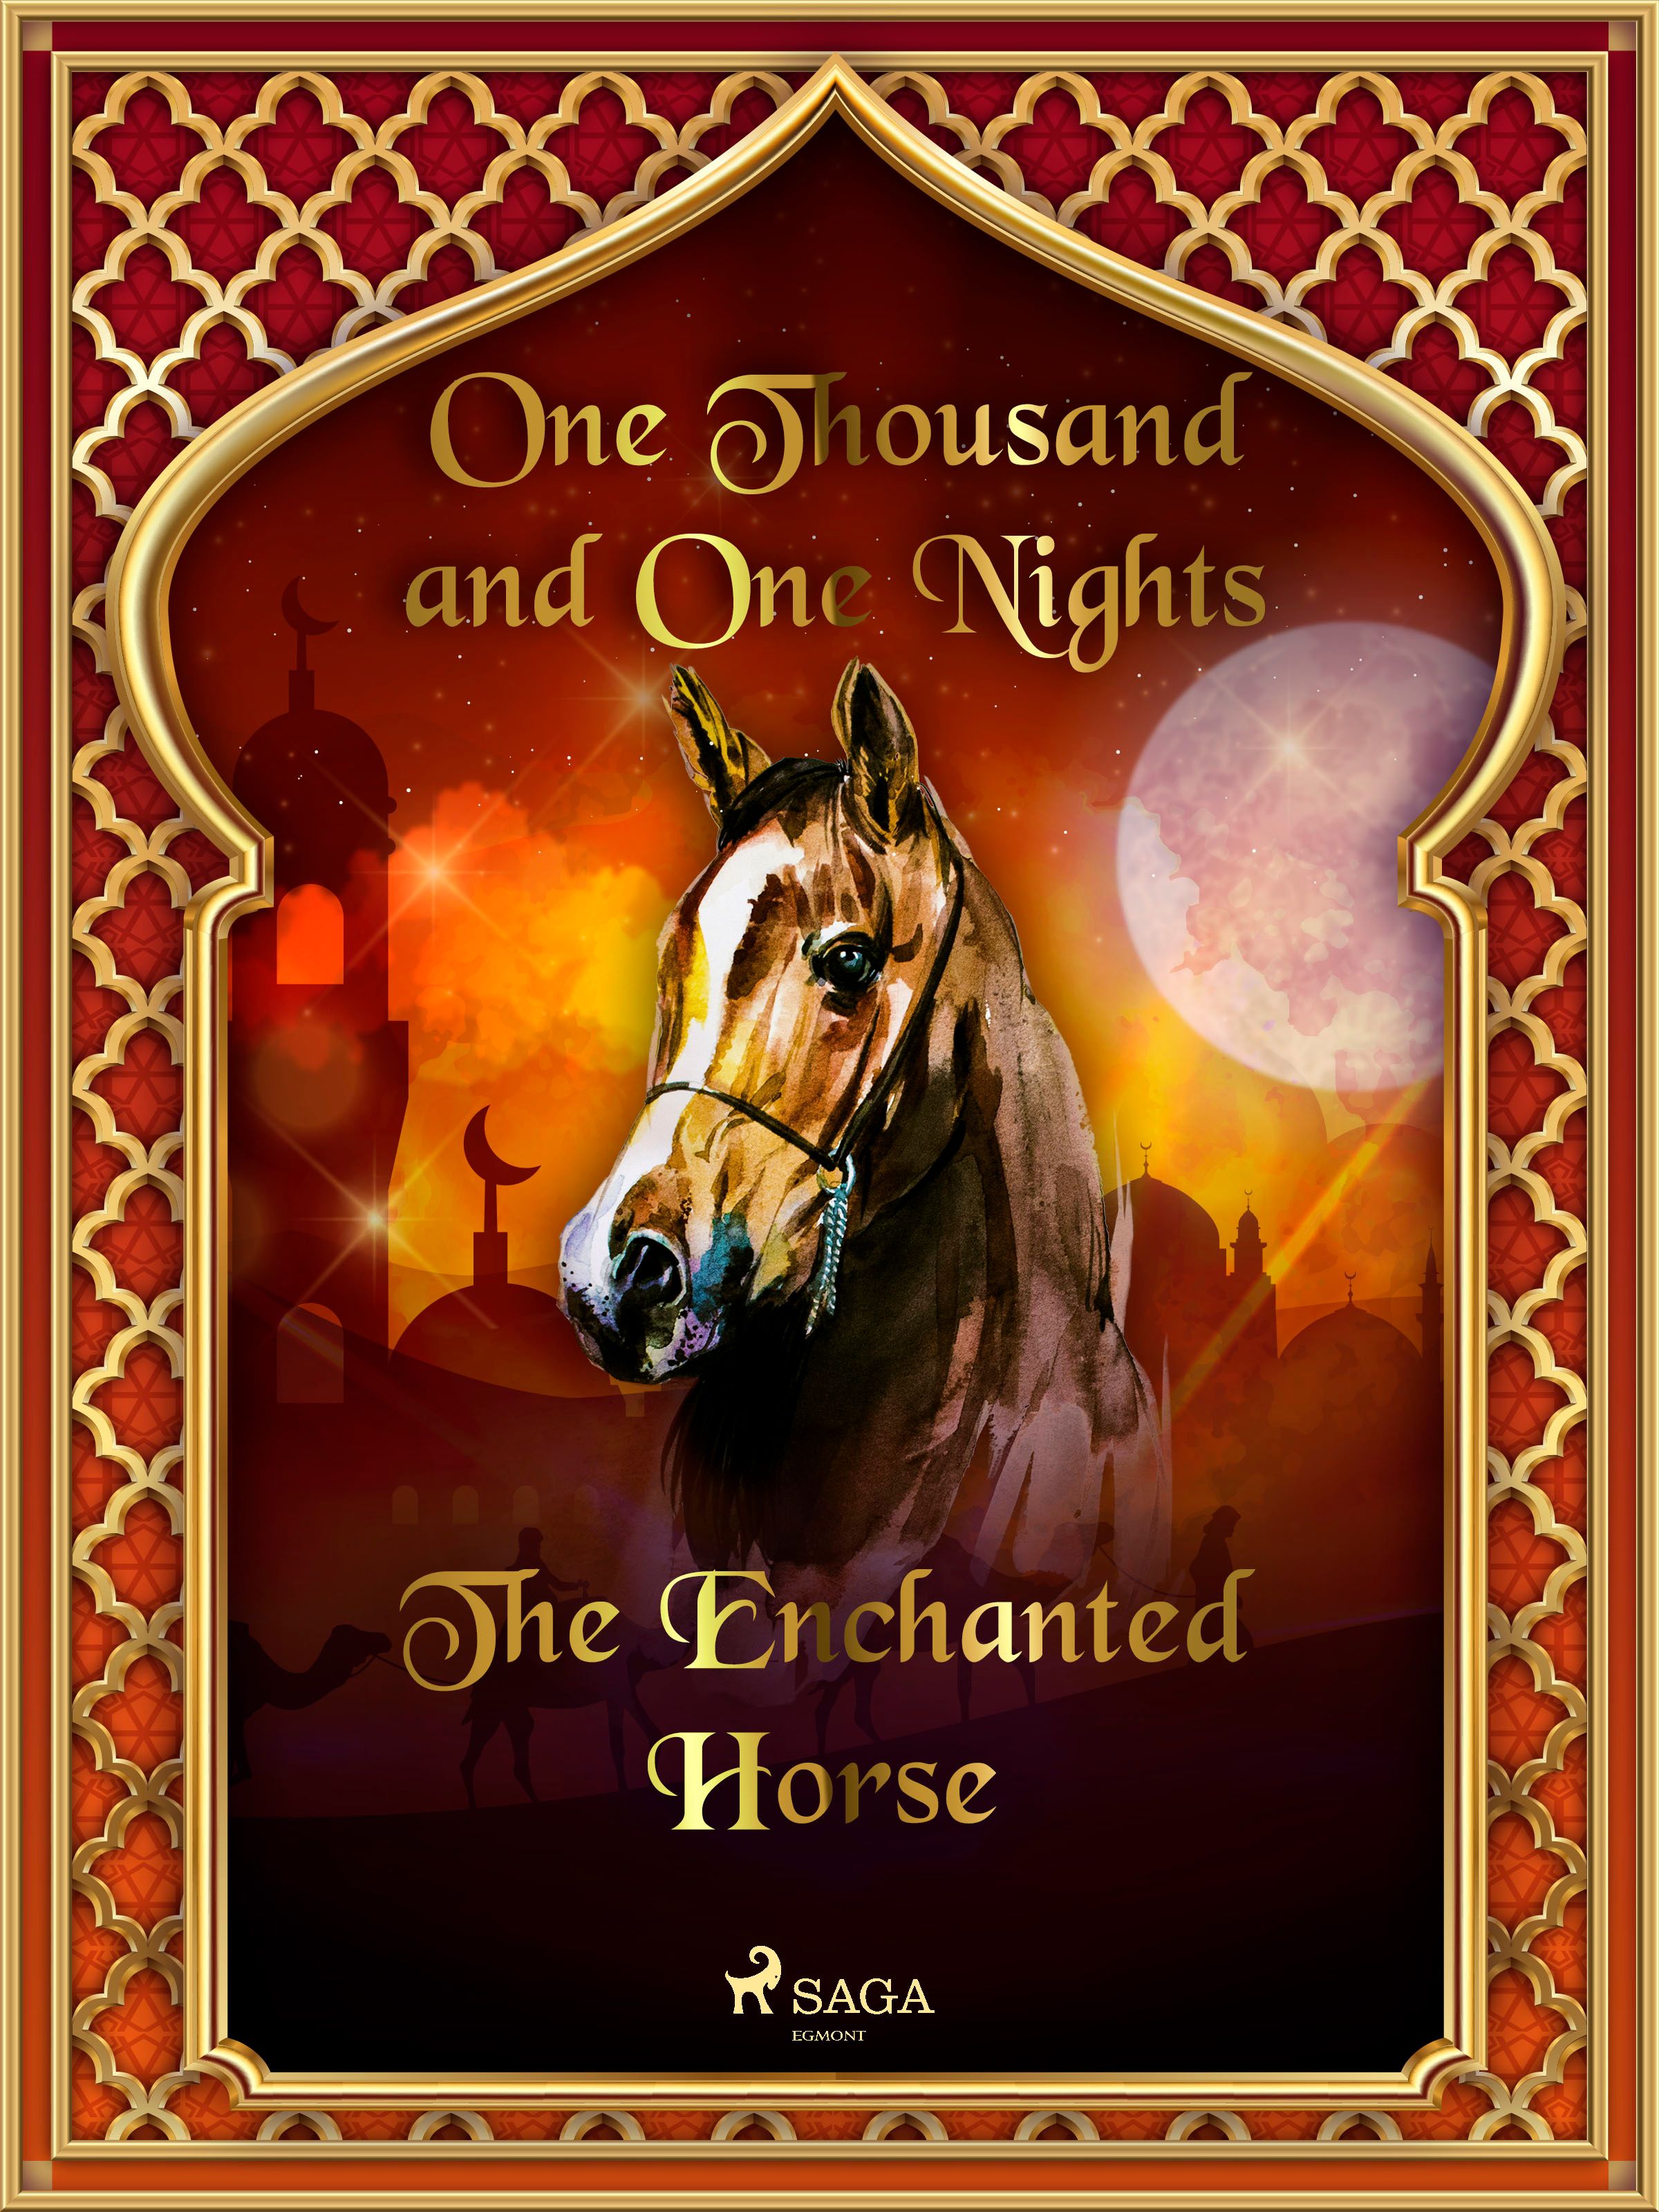 The Enchanted Horse, eBook by One Thousand and One Nights